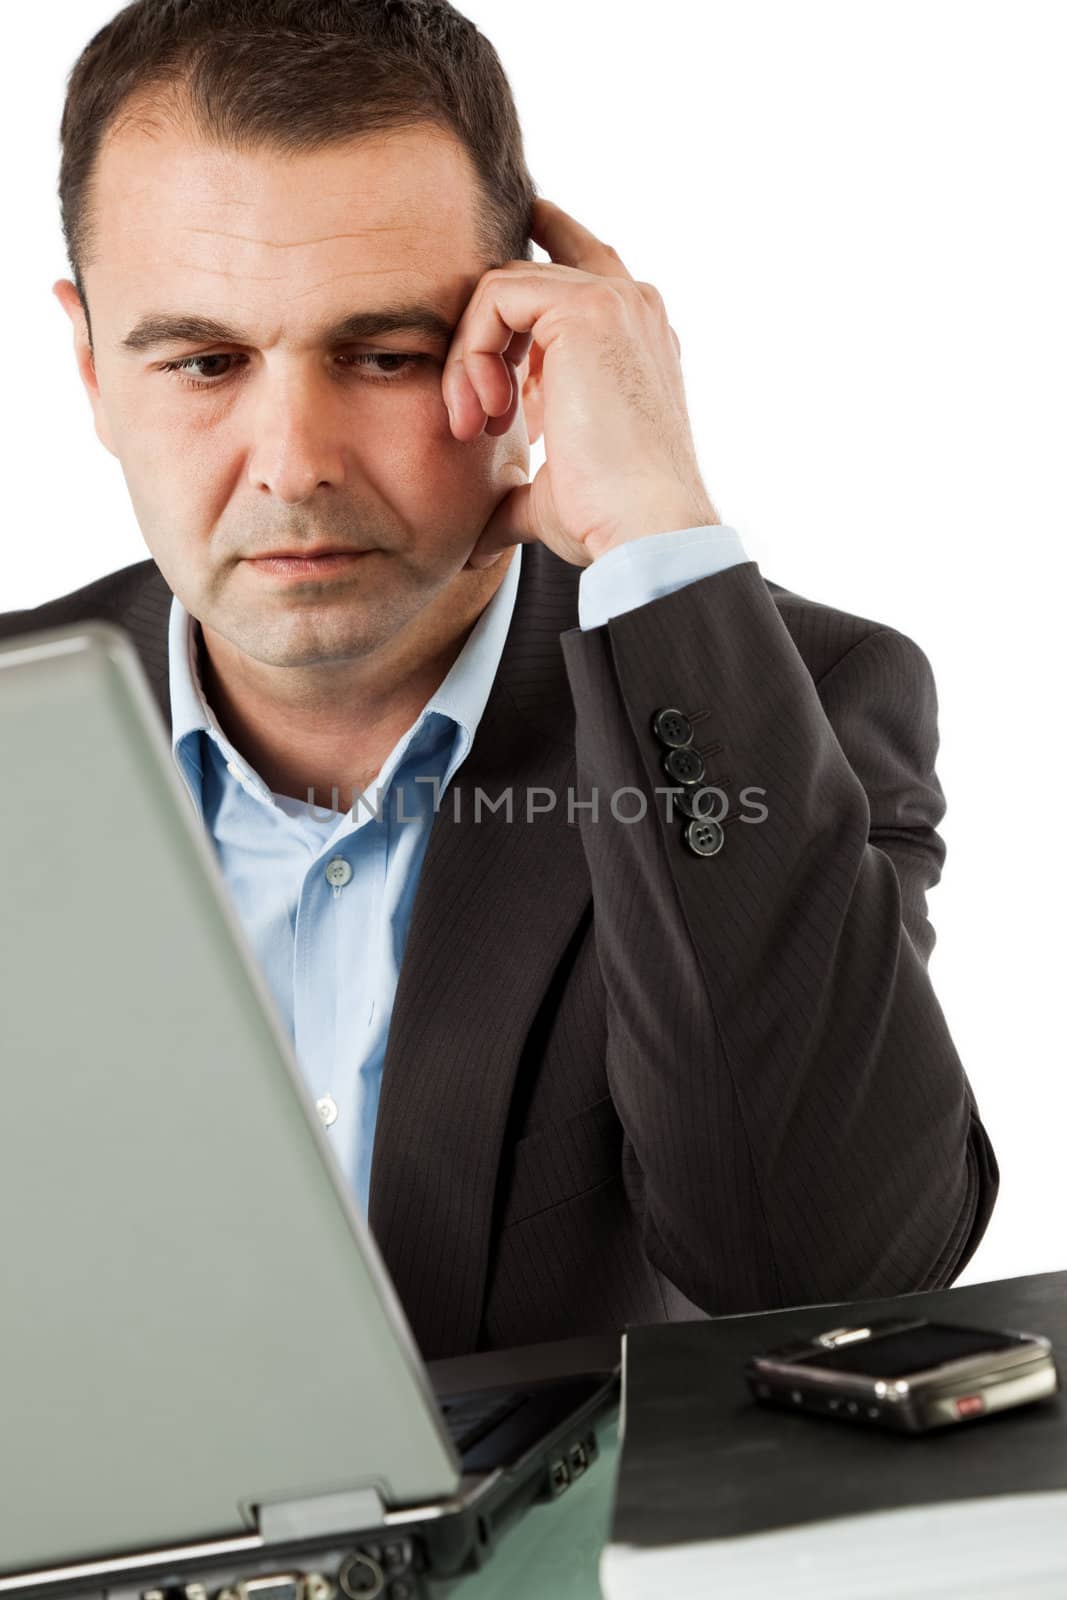 Businessman working behind laptop, looking at his cell phone thinking